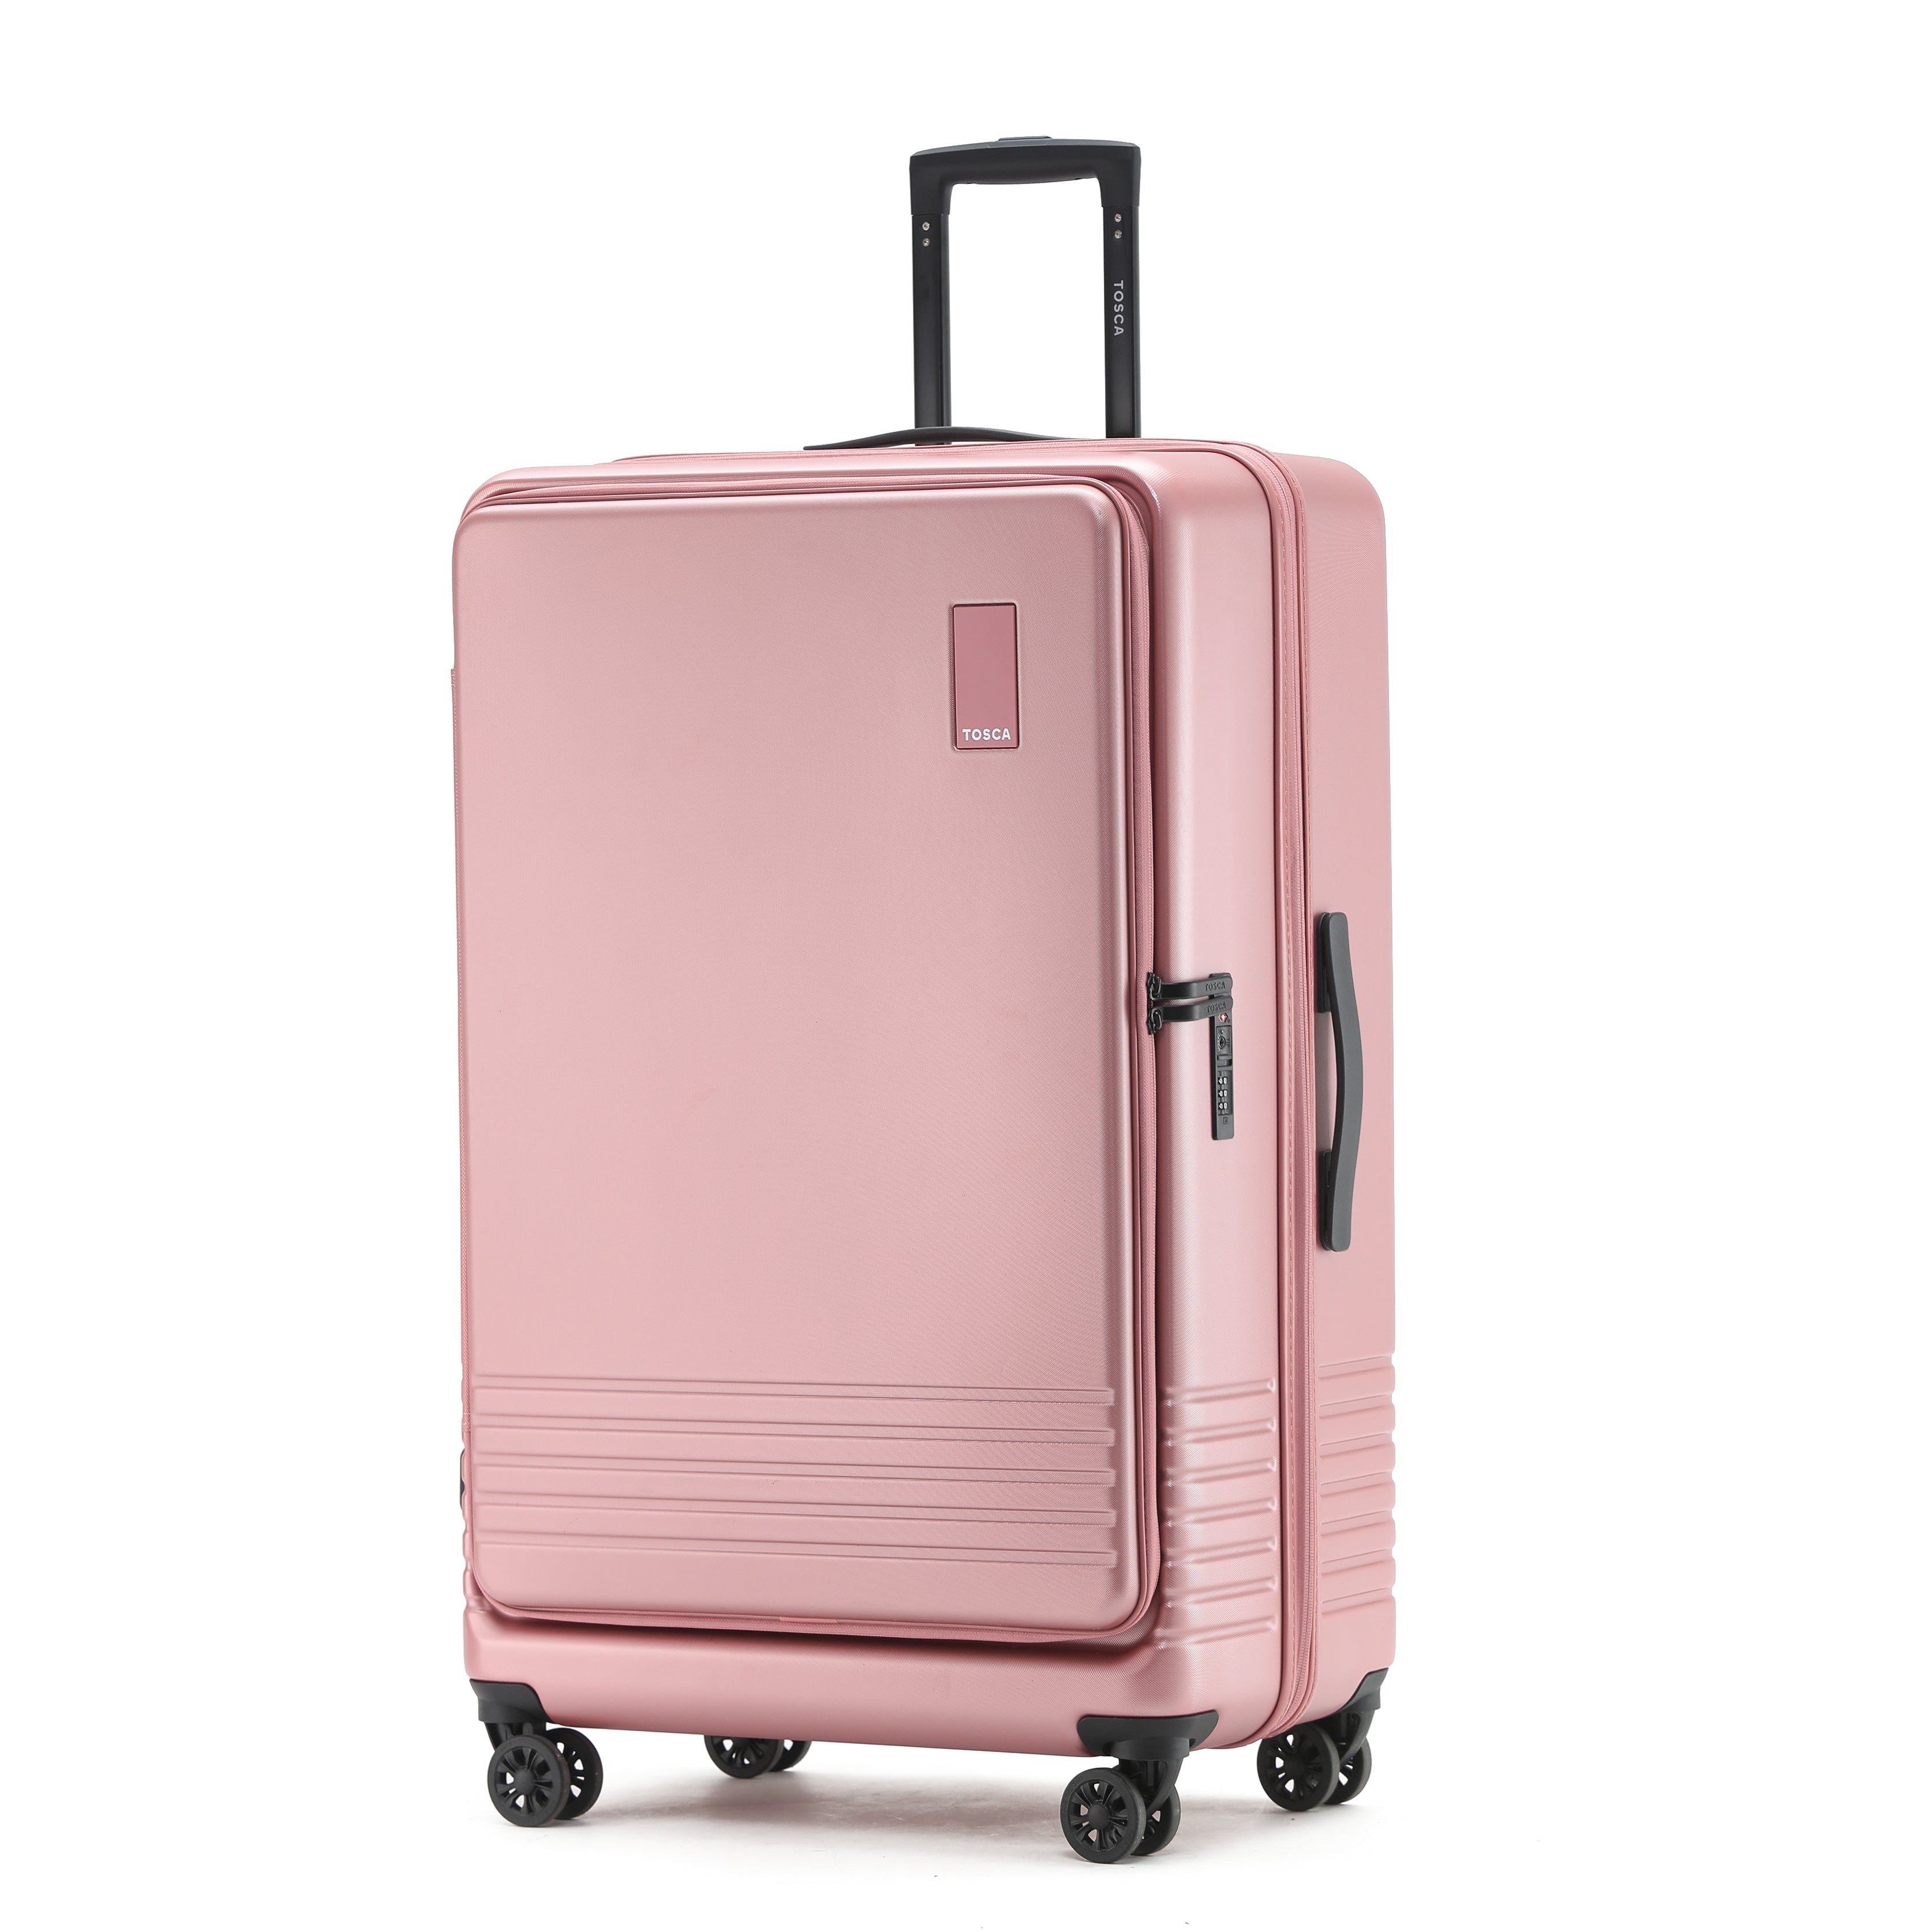 Tosca - TCA644 Horizon Front lid opening Set of 3 suitcases - Dusty Rose-7